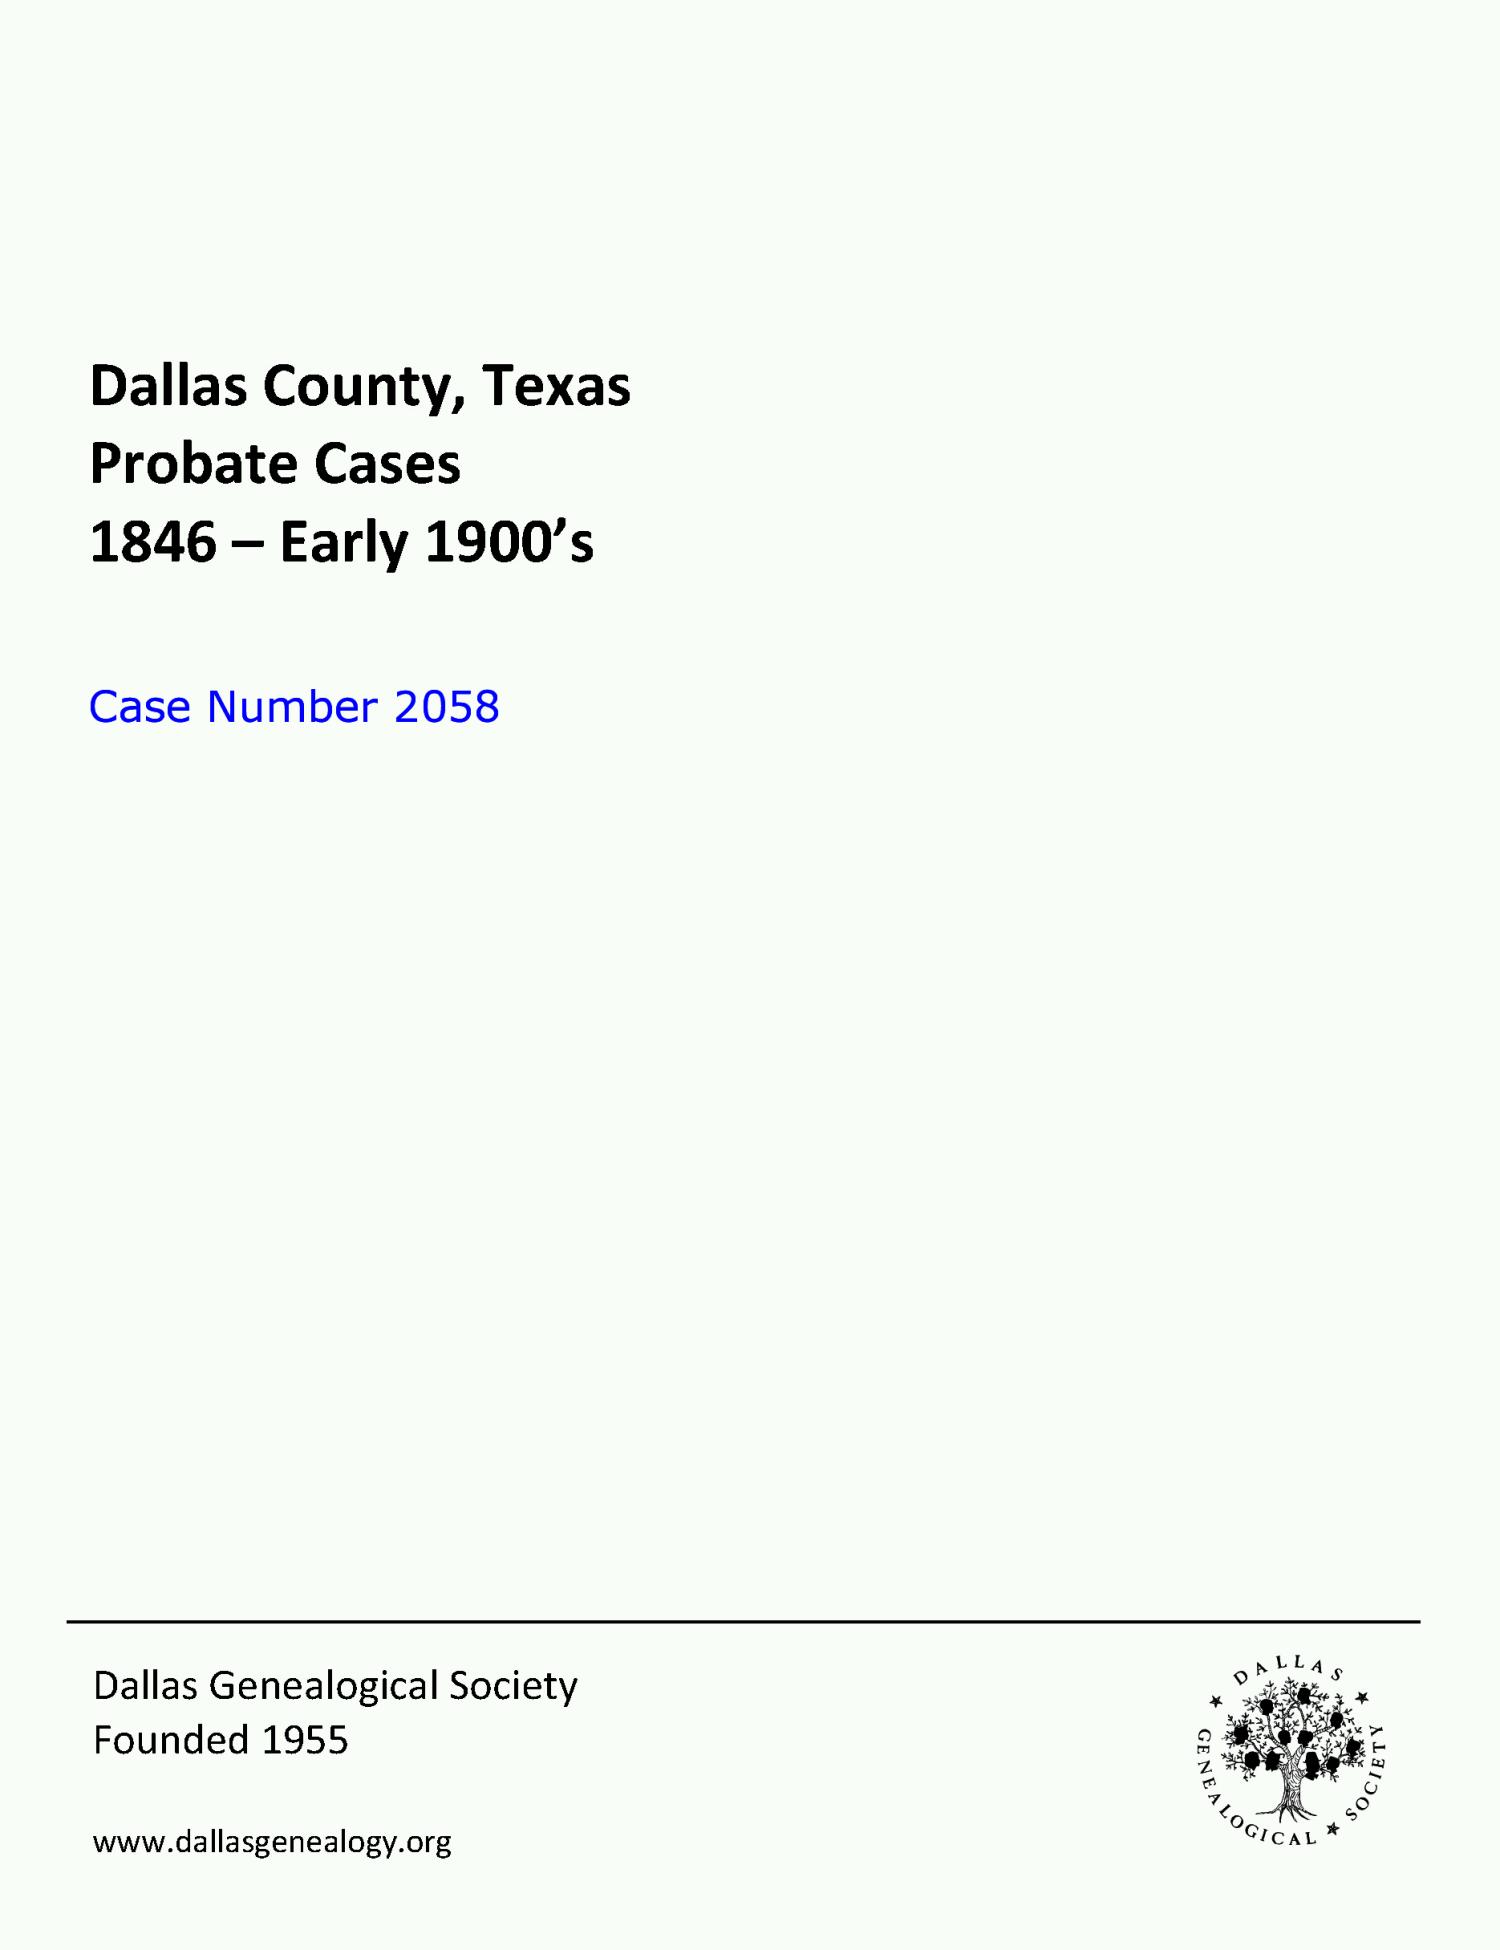 Dallas County Probate Case 2058: Hawes, Robert S. (Minor)
                                                
                                                    [Sequence #]: 1 of 18
                                                